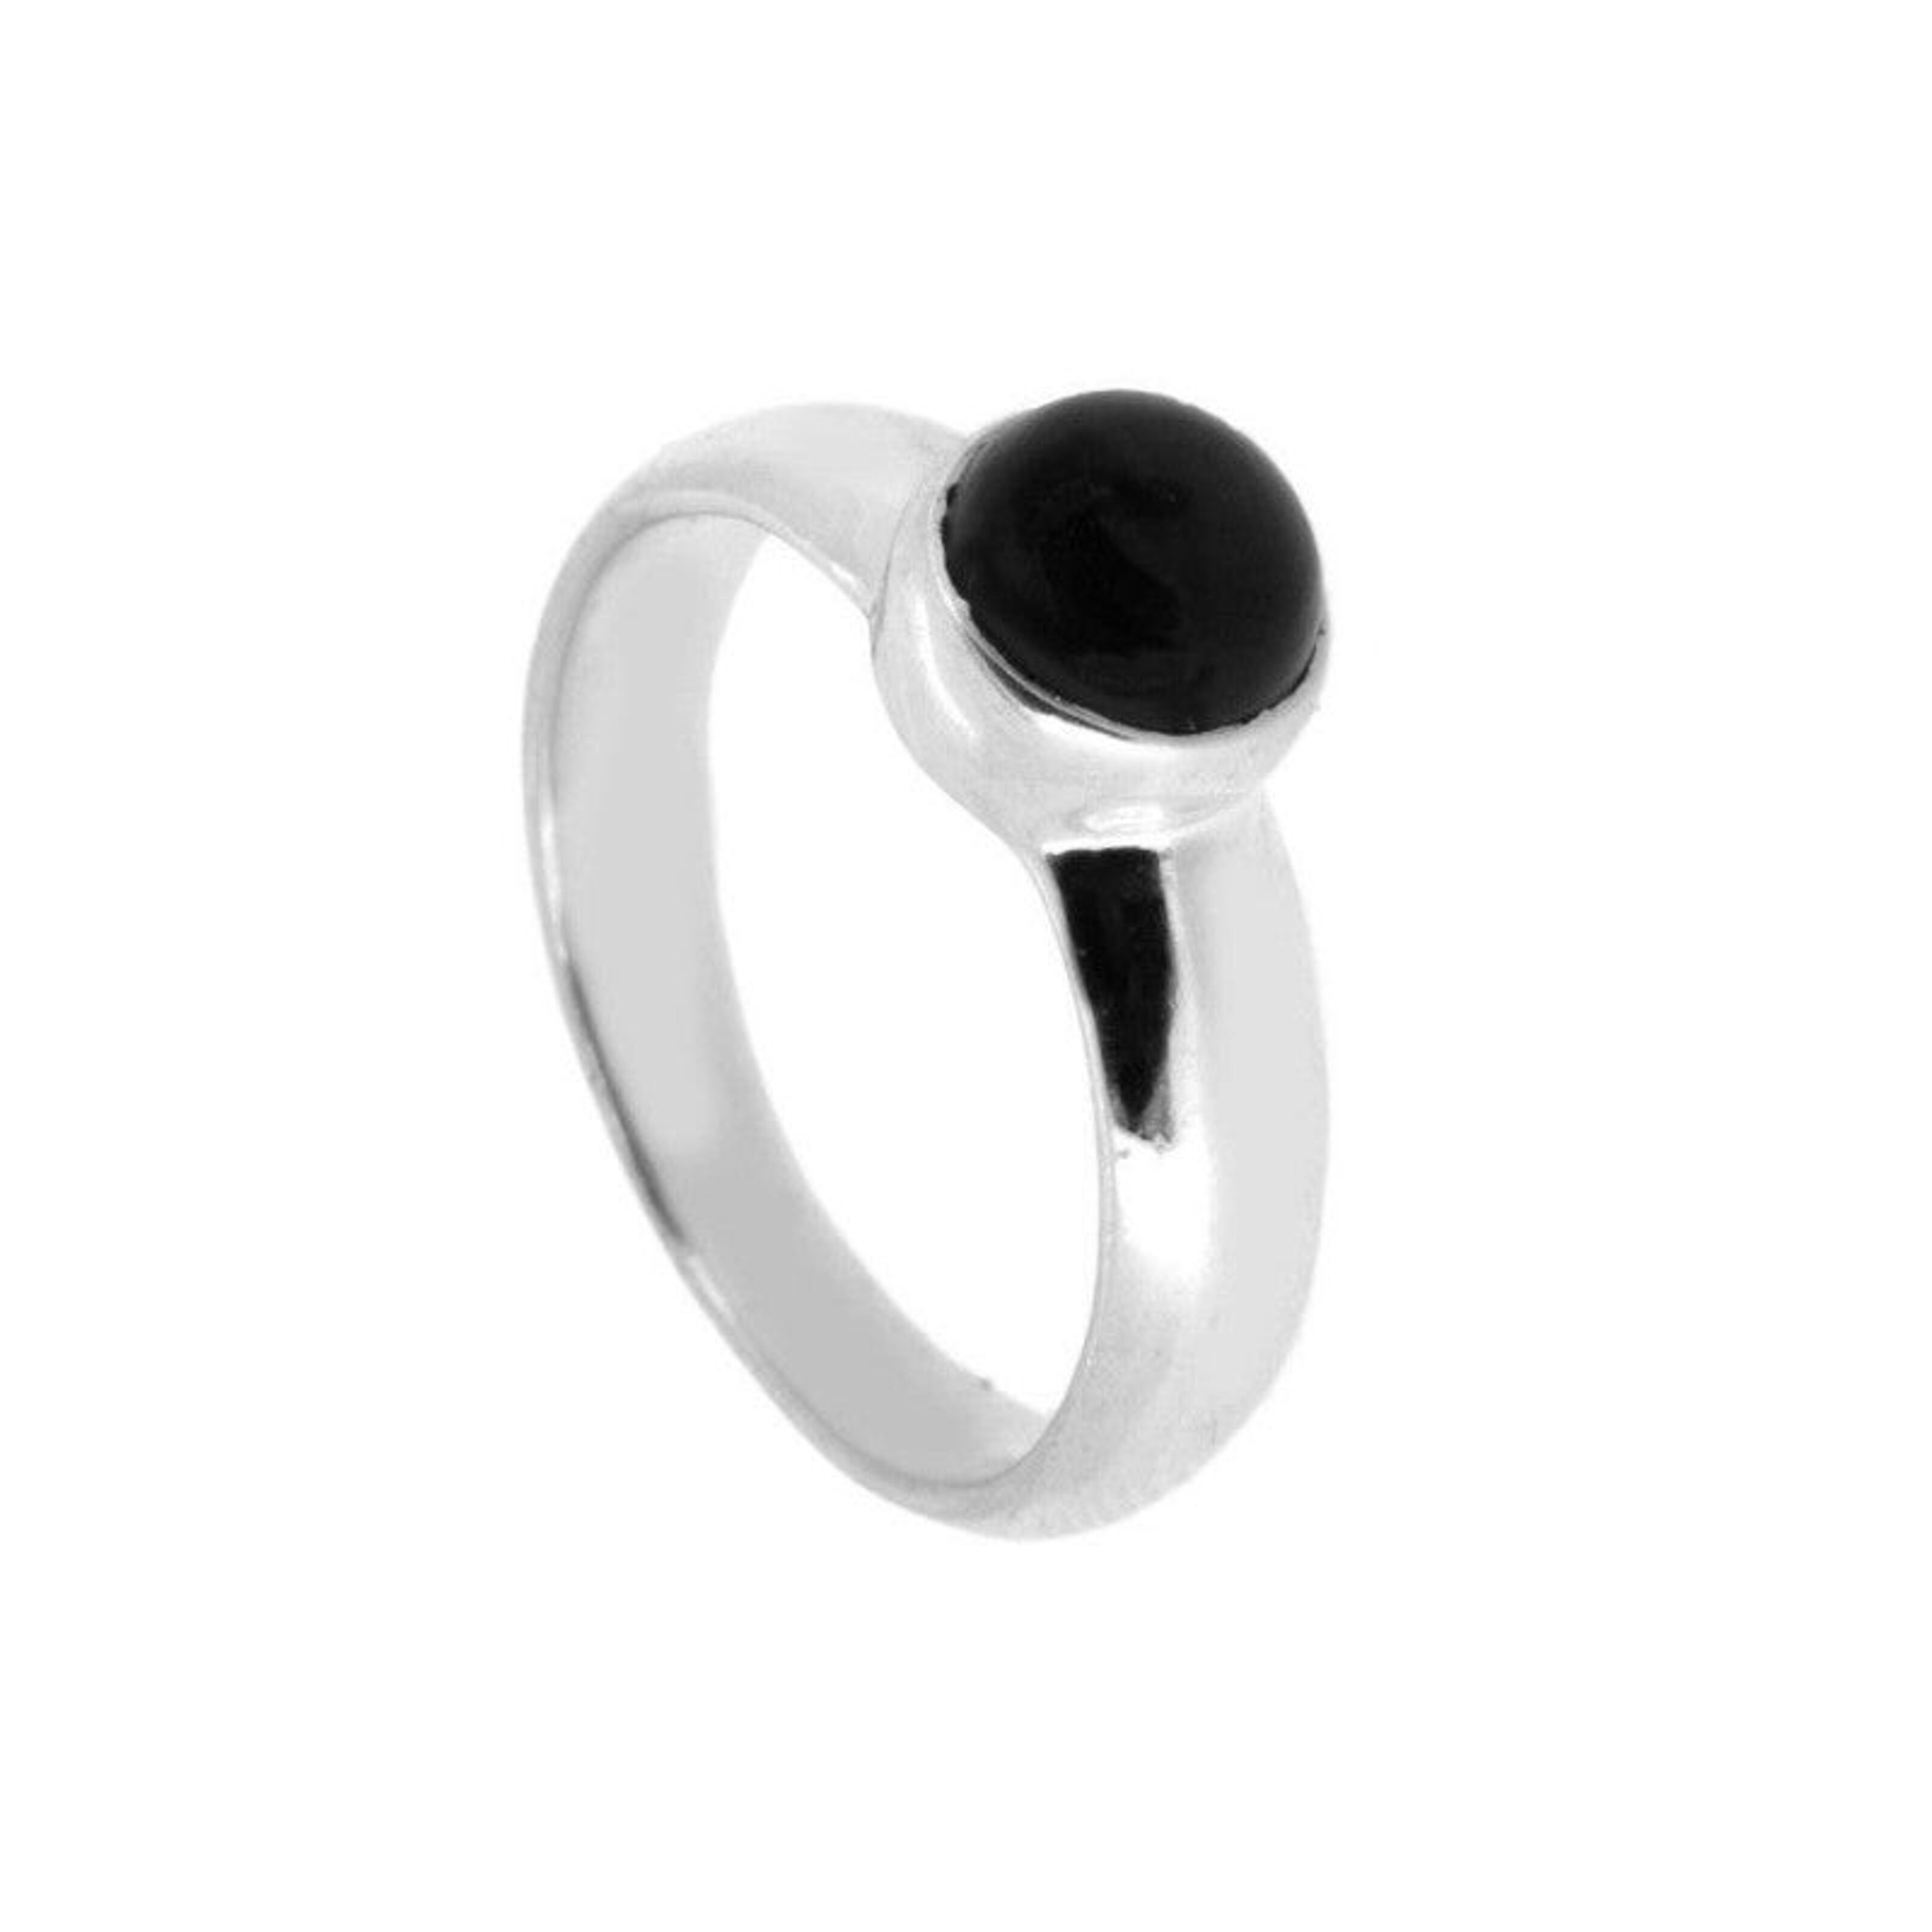 Buy wholesale Black Onyx Ring, 925 Sterling Silver Ring - silver - US10